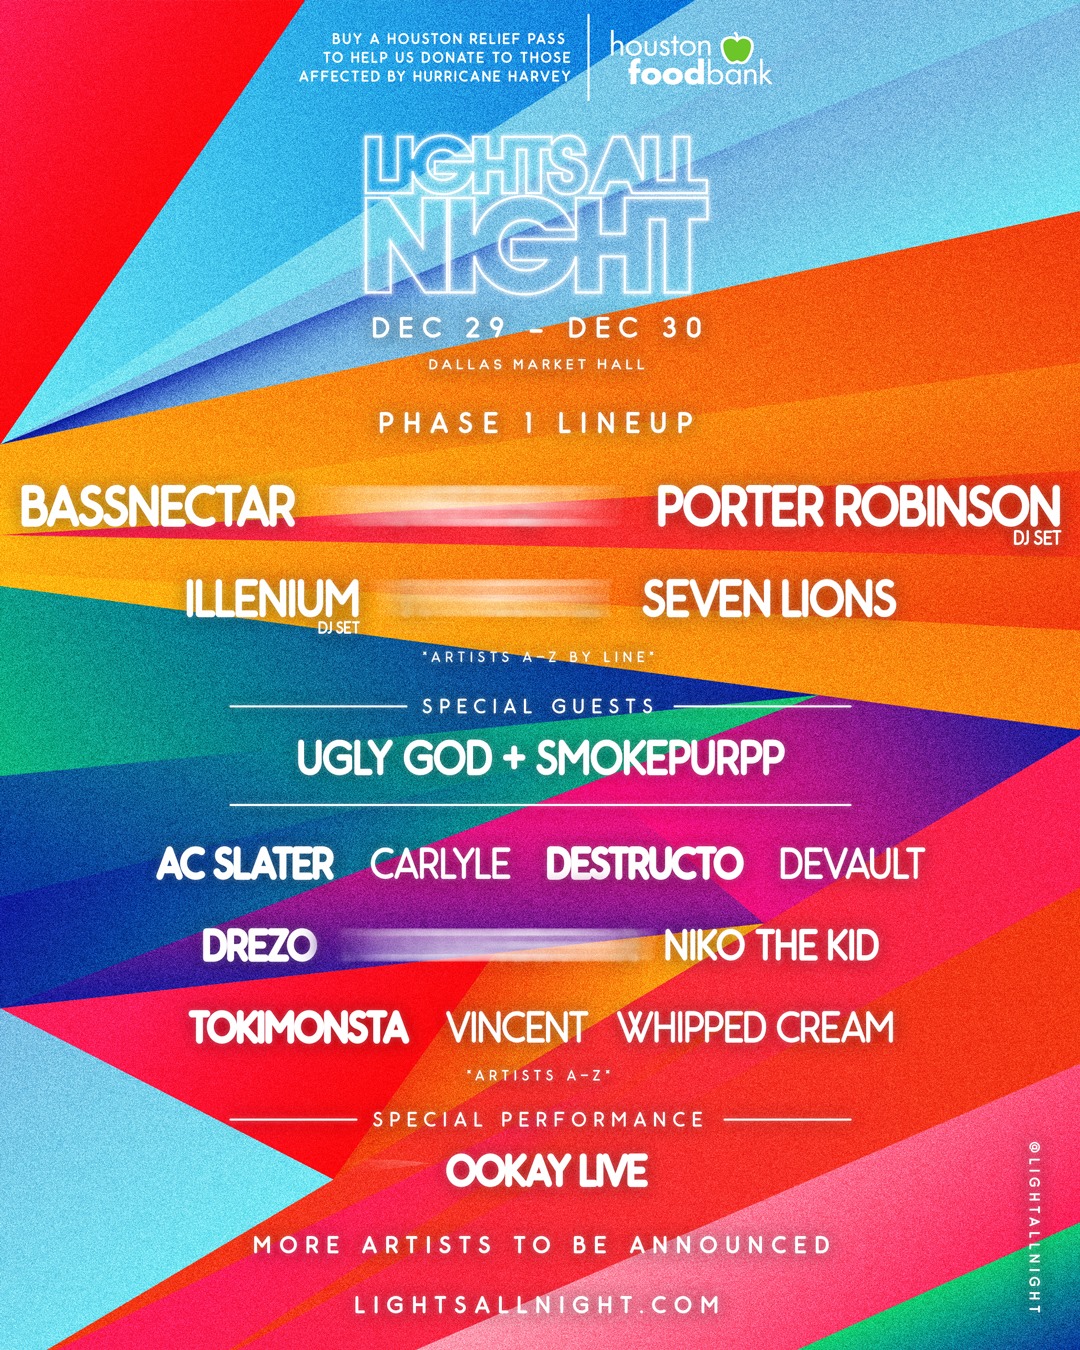 Lights All Night Just Unveiled Their Lineup And Will Be Helping Those